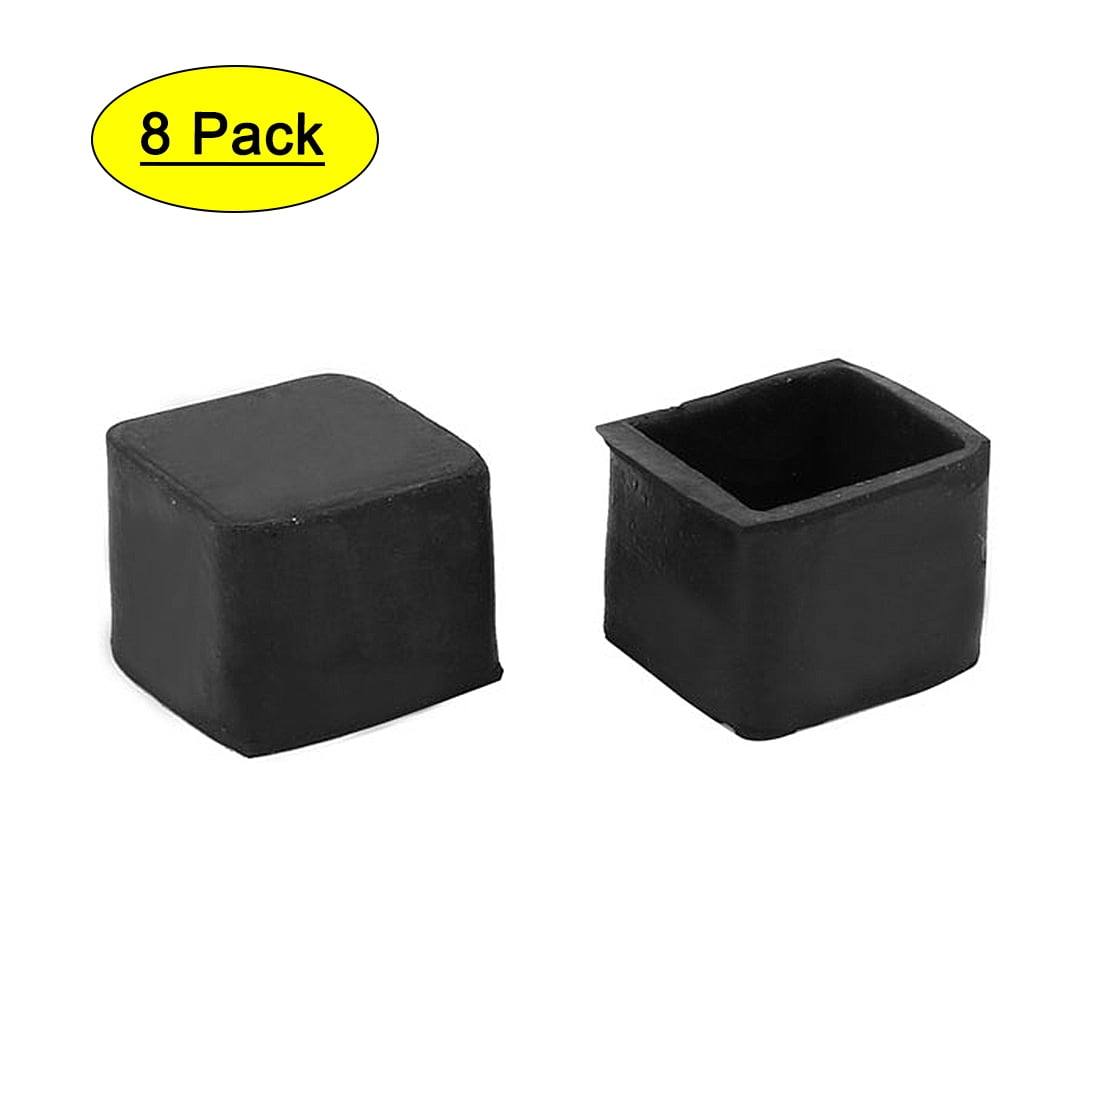 24Pcs Rubber Furniture Foot Table Chair Leg End Caps Covers Tips Floor Protector 